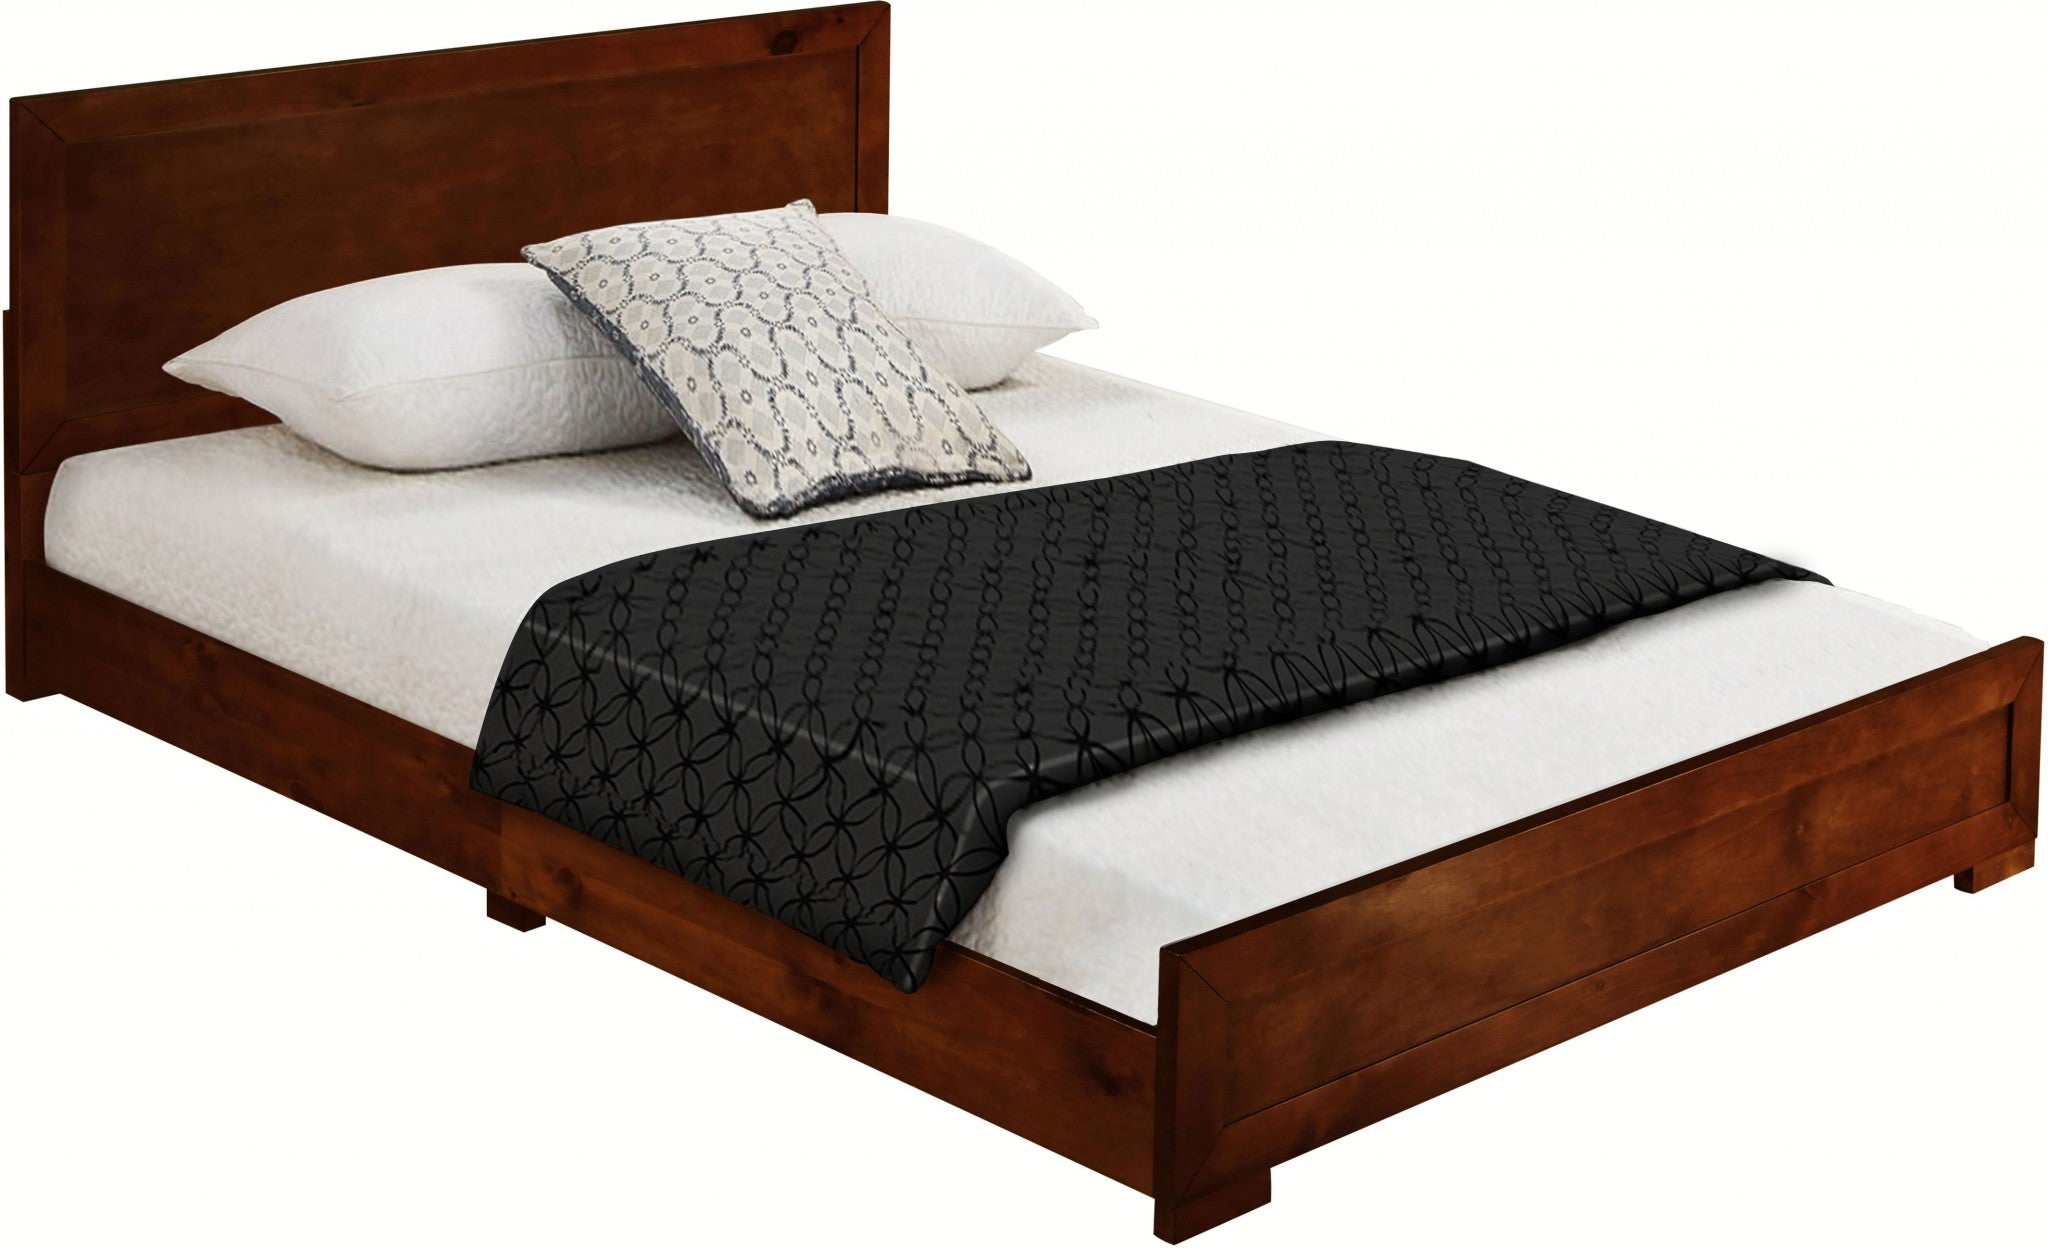 Moma Walnut Wood Platform Full Bed With Nightstand